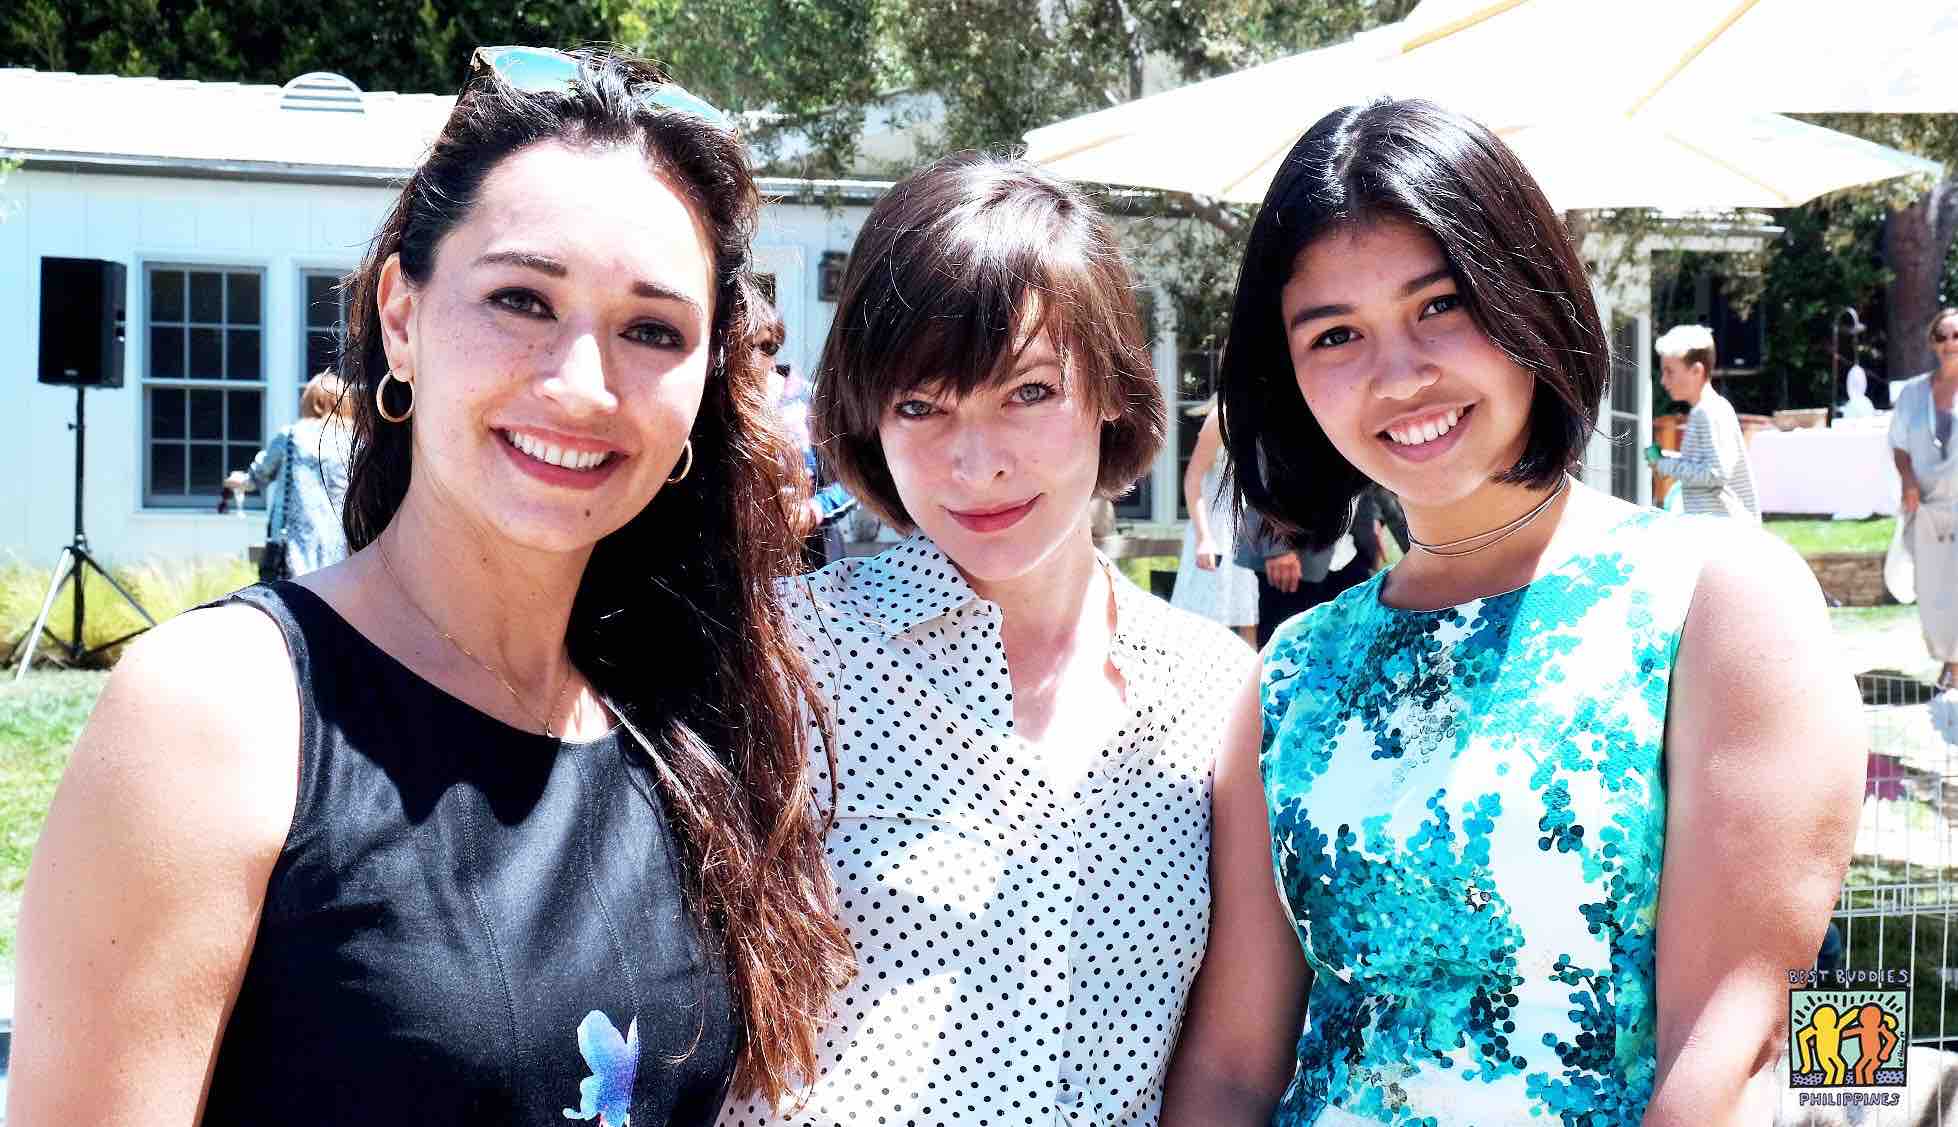 BEST BUDDIES. Best Buddies International's Mother of the Year awardee Michelle Ressa Aventajado and daughter Gia pose with actress Milla Jovovich, who attended the awards ceremony on May 13 in Malibu, California. Photo courtesy of Best Buddies - Philippines 